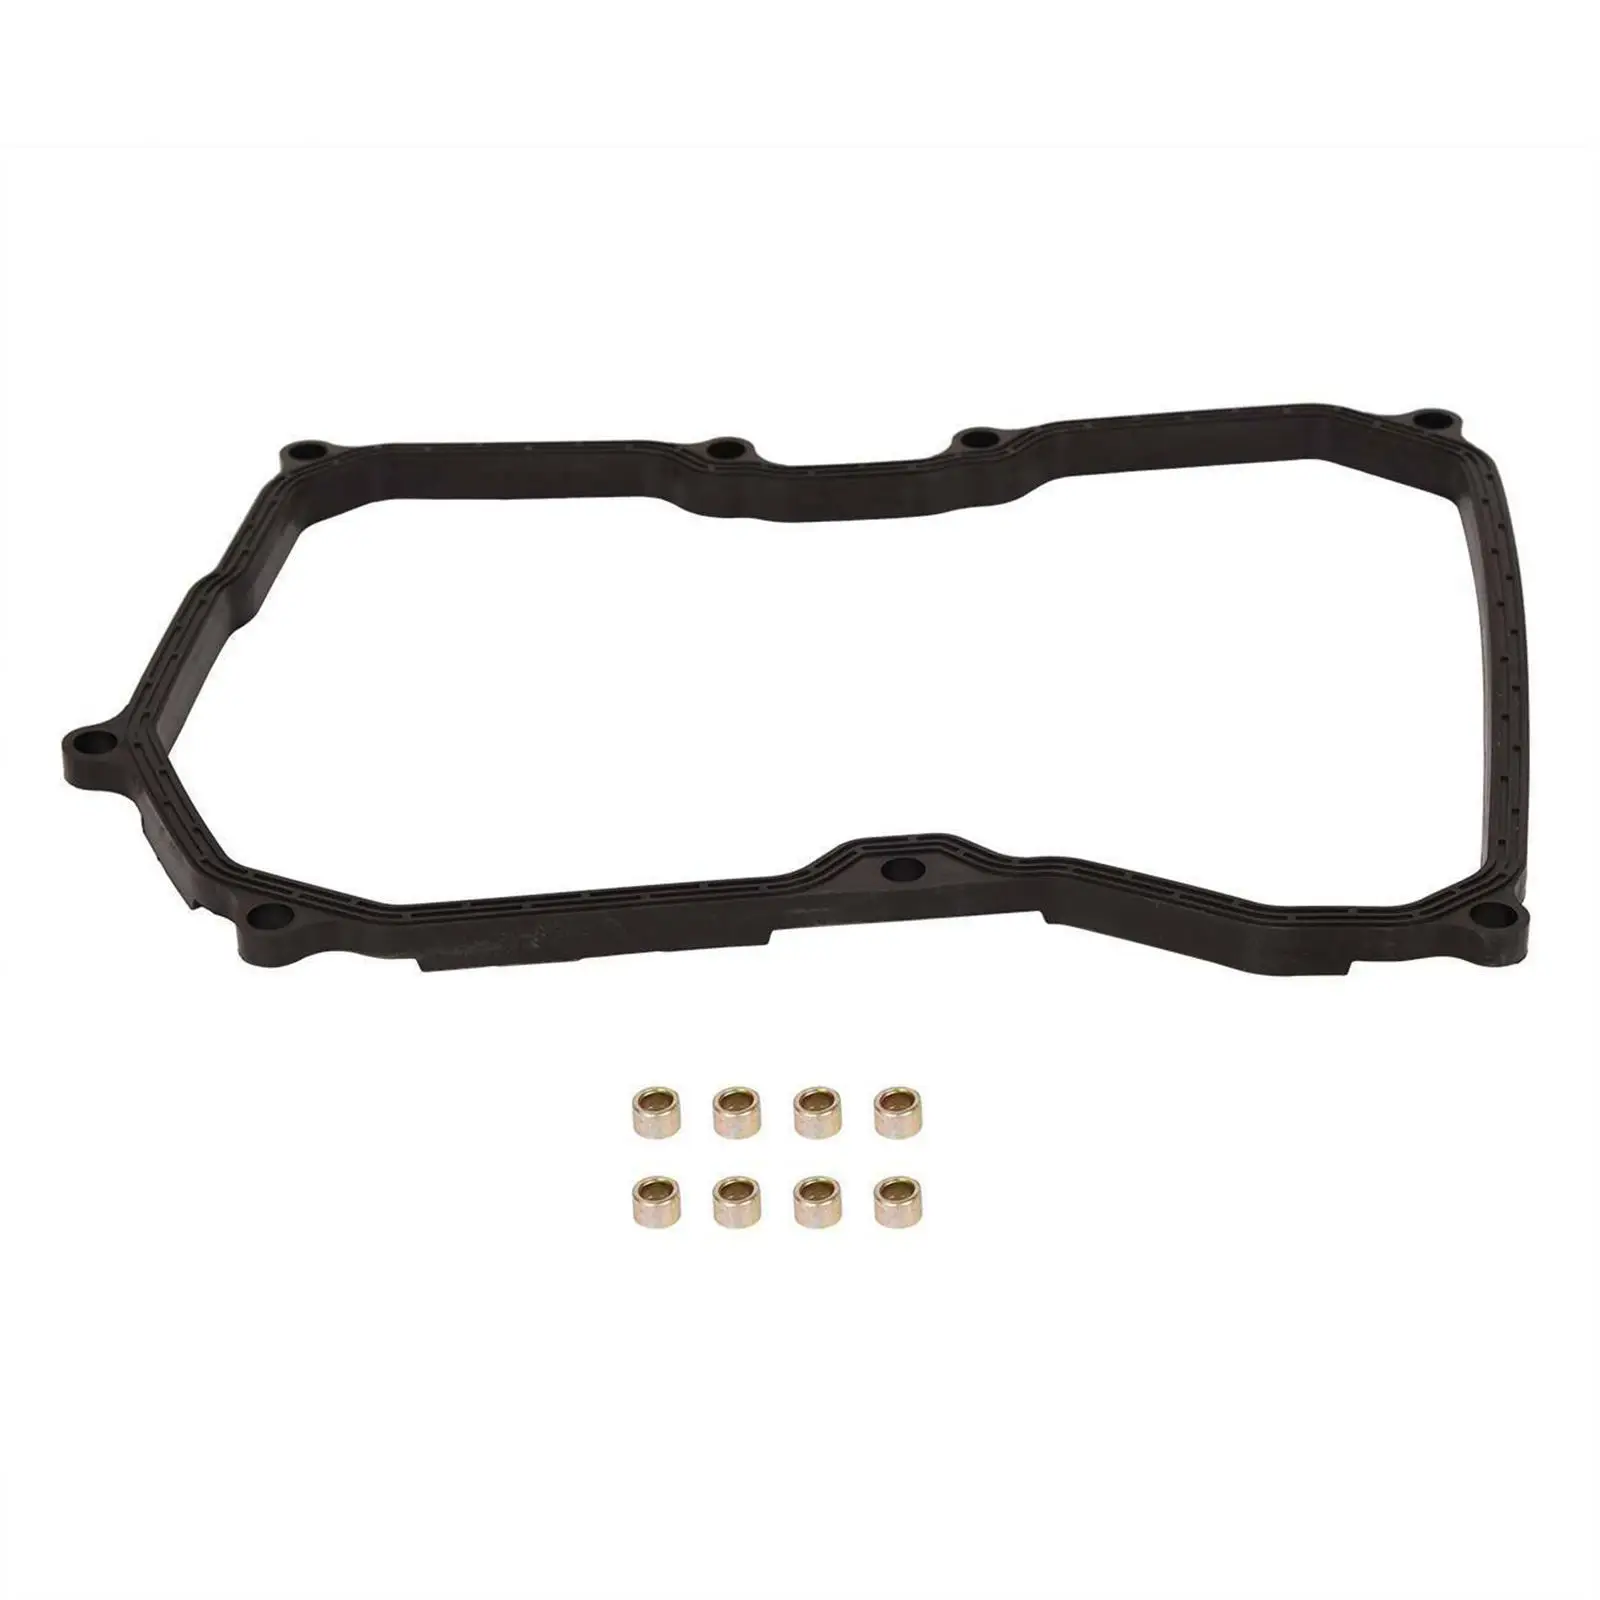 Transmission Pan Gasket Lightweight Durable 24117566356 for Mini Replacement Parts Easy to Install Accessories